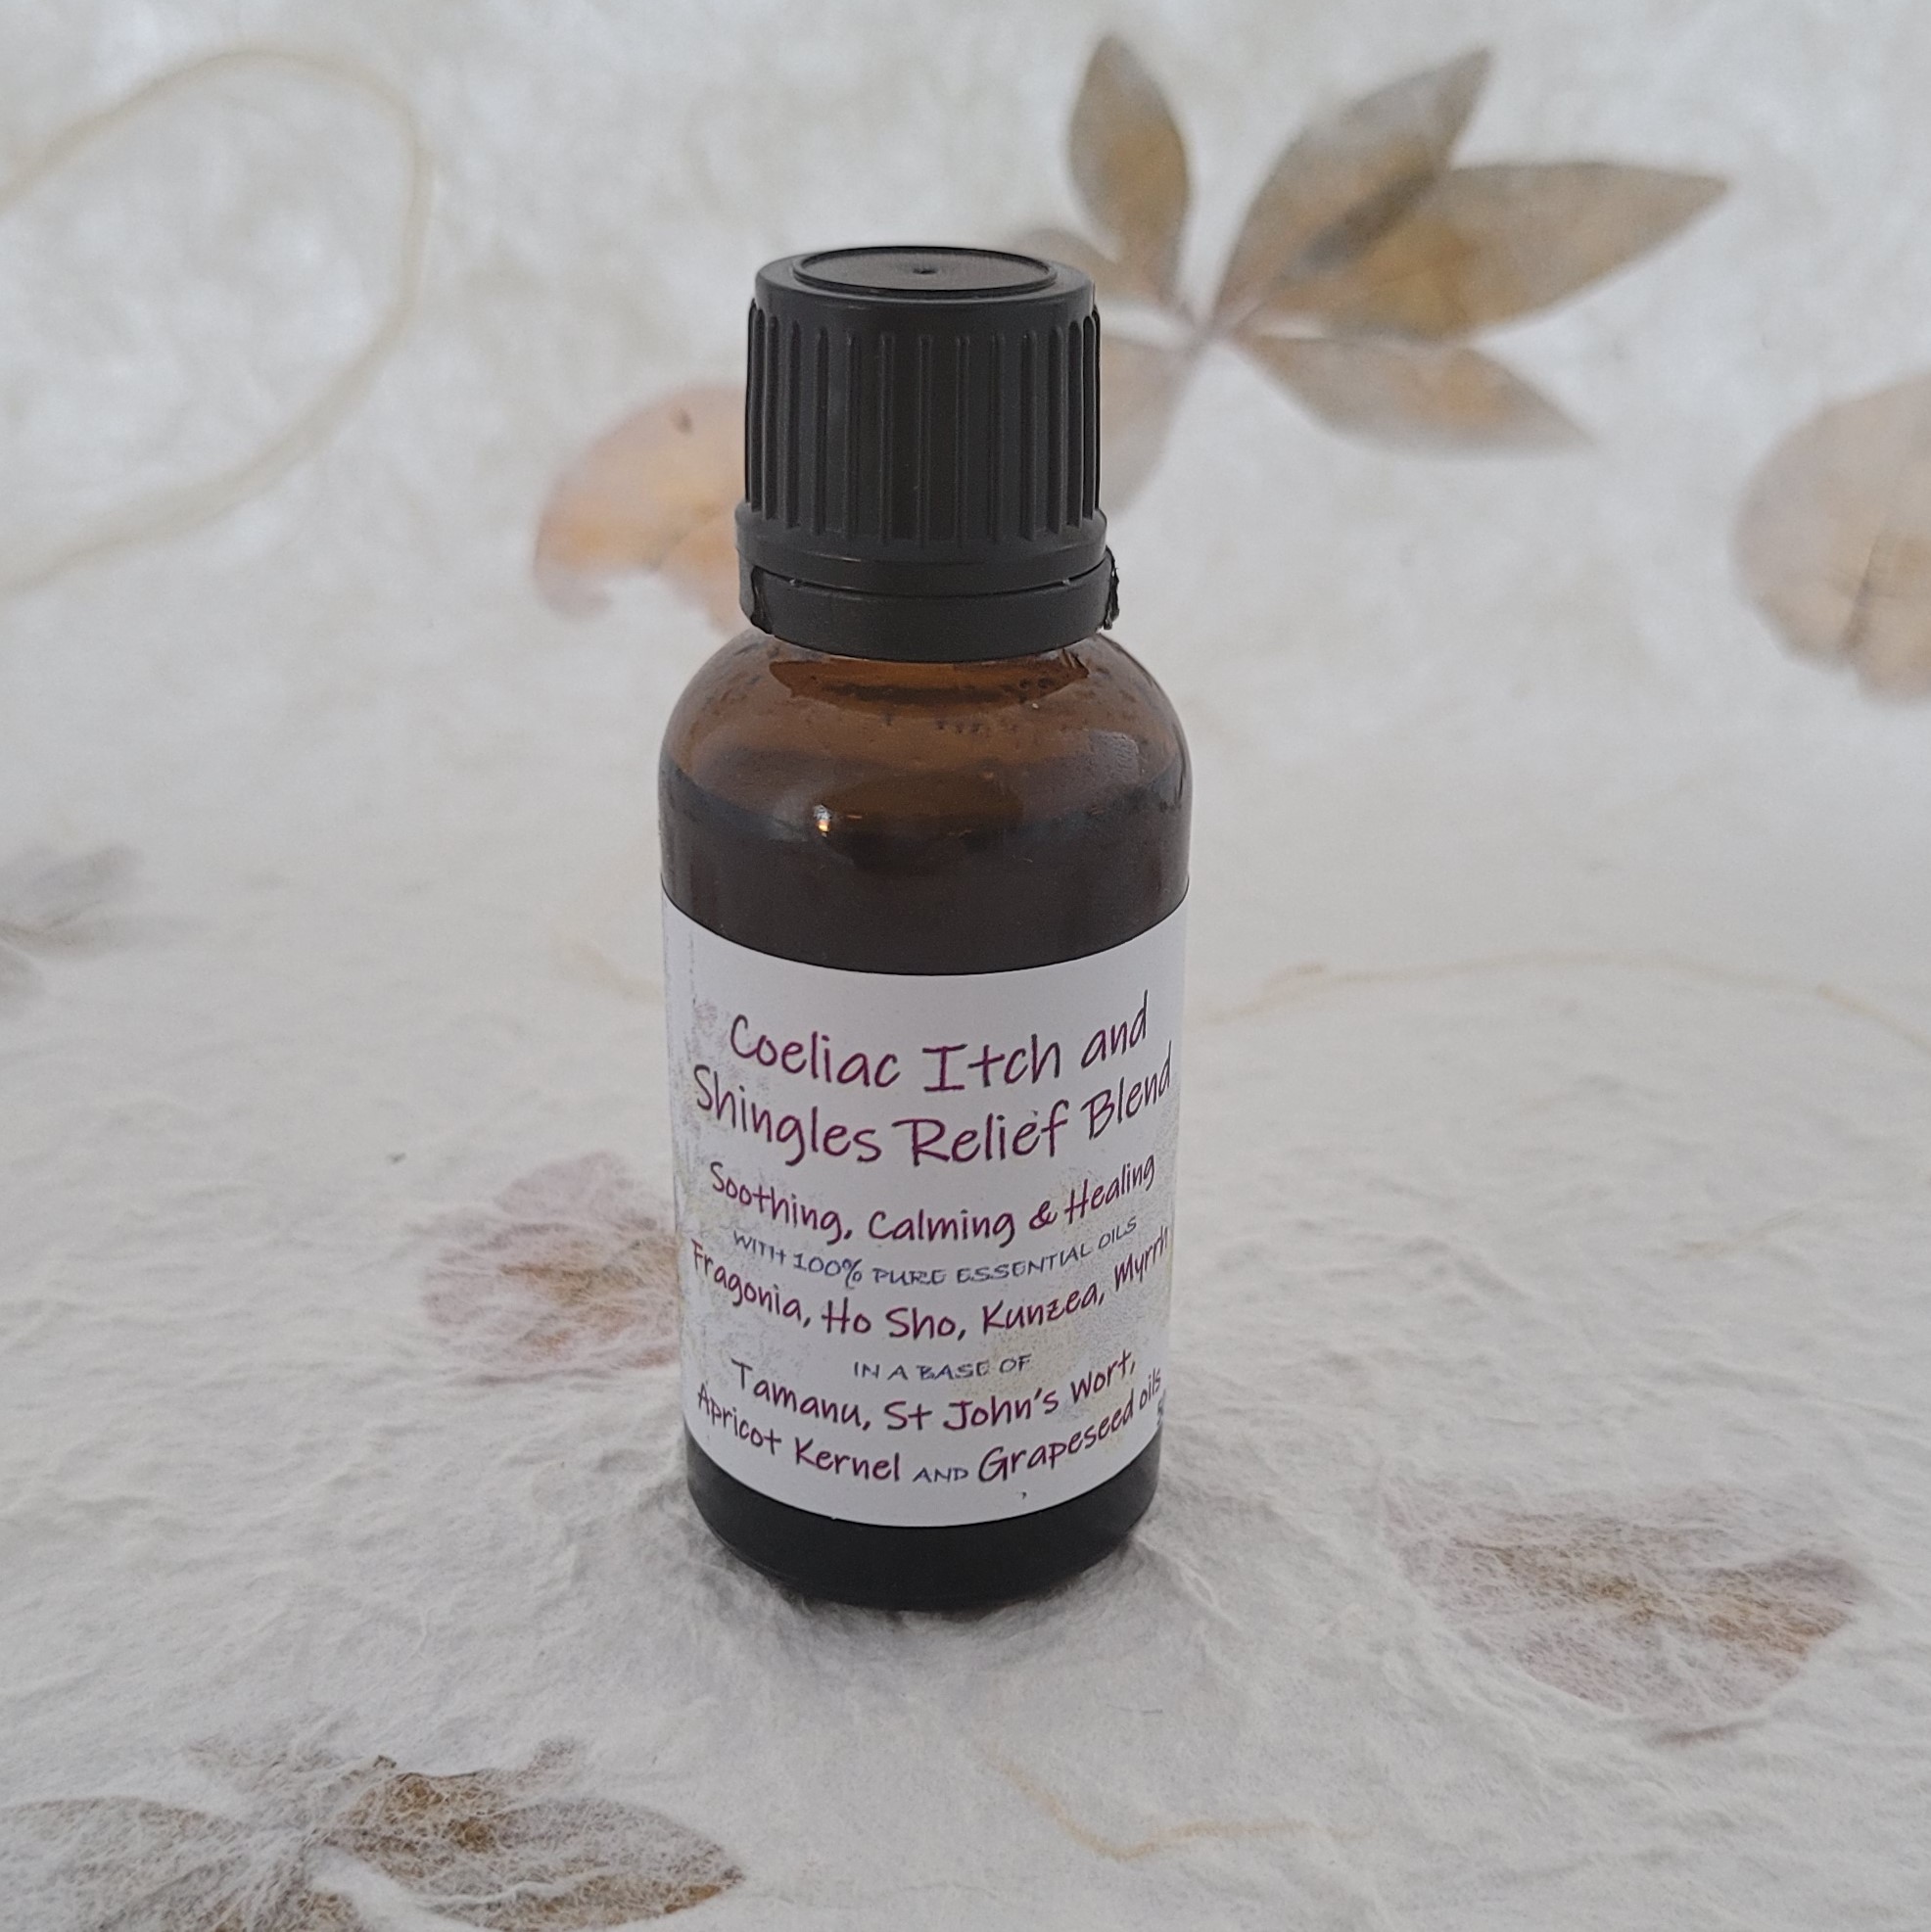 Amor Coeliac Itch and Shingles Relief Oil